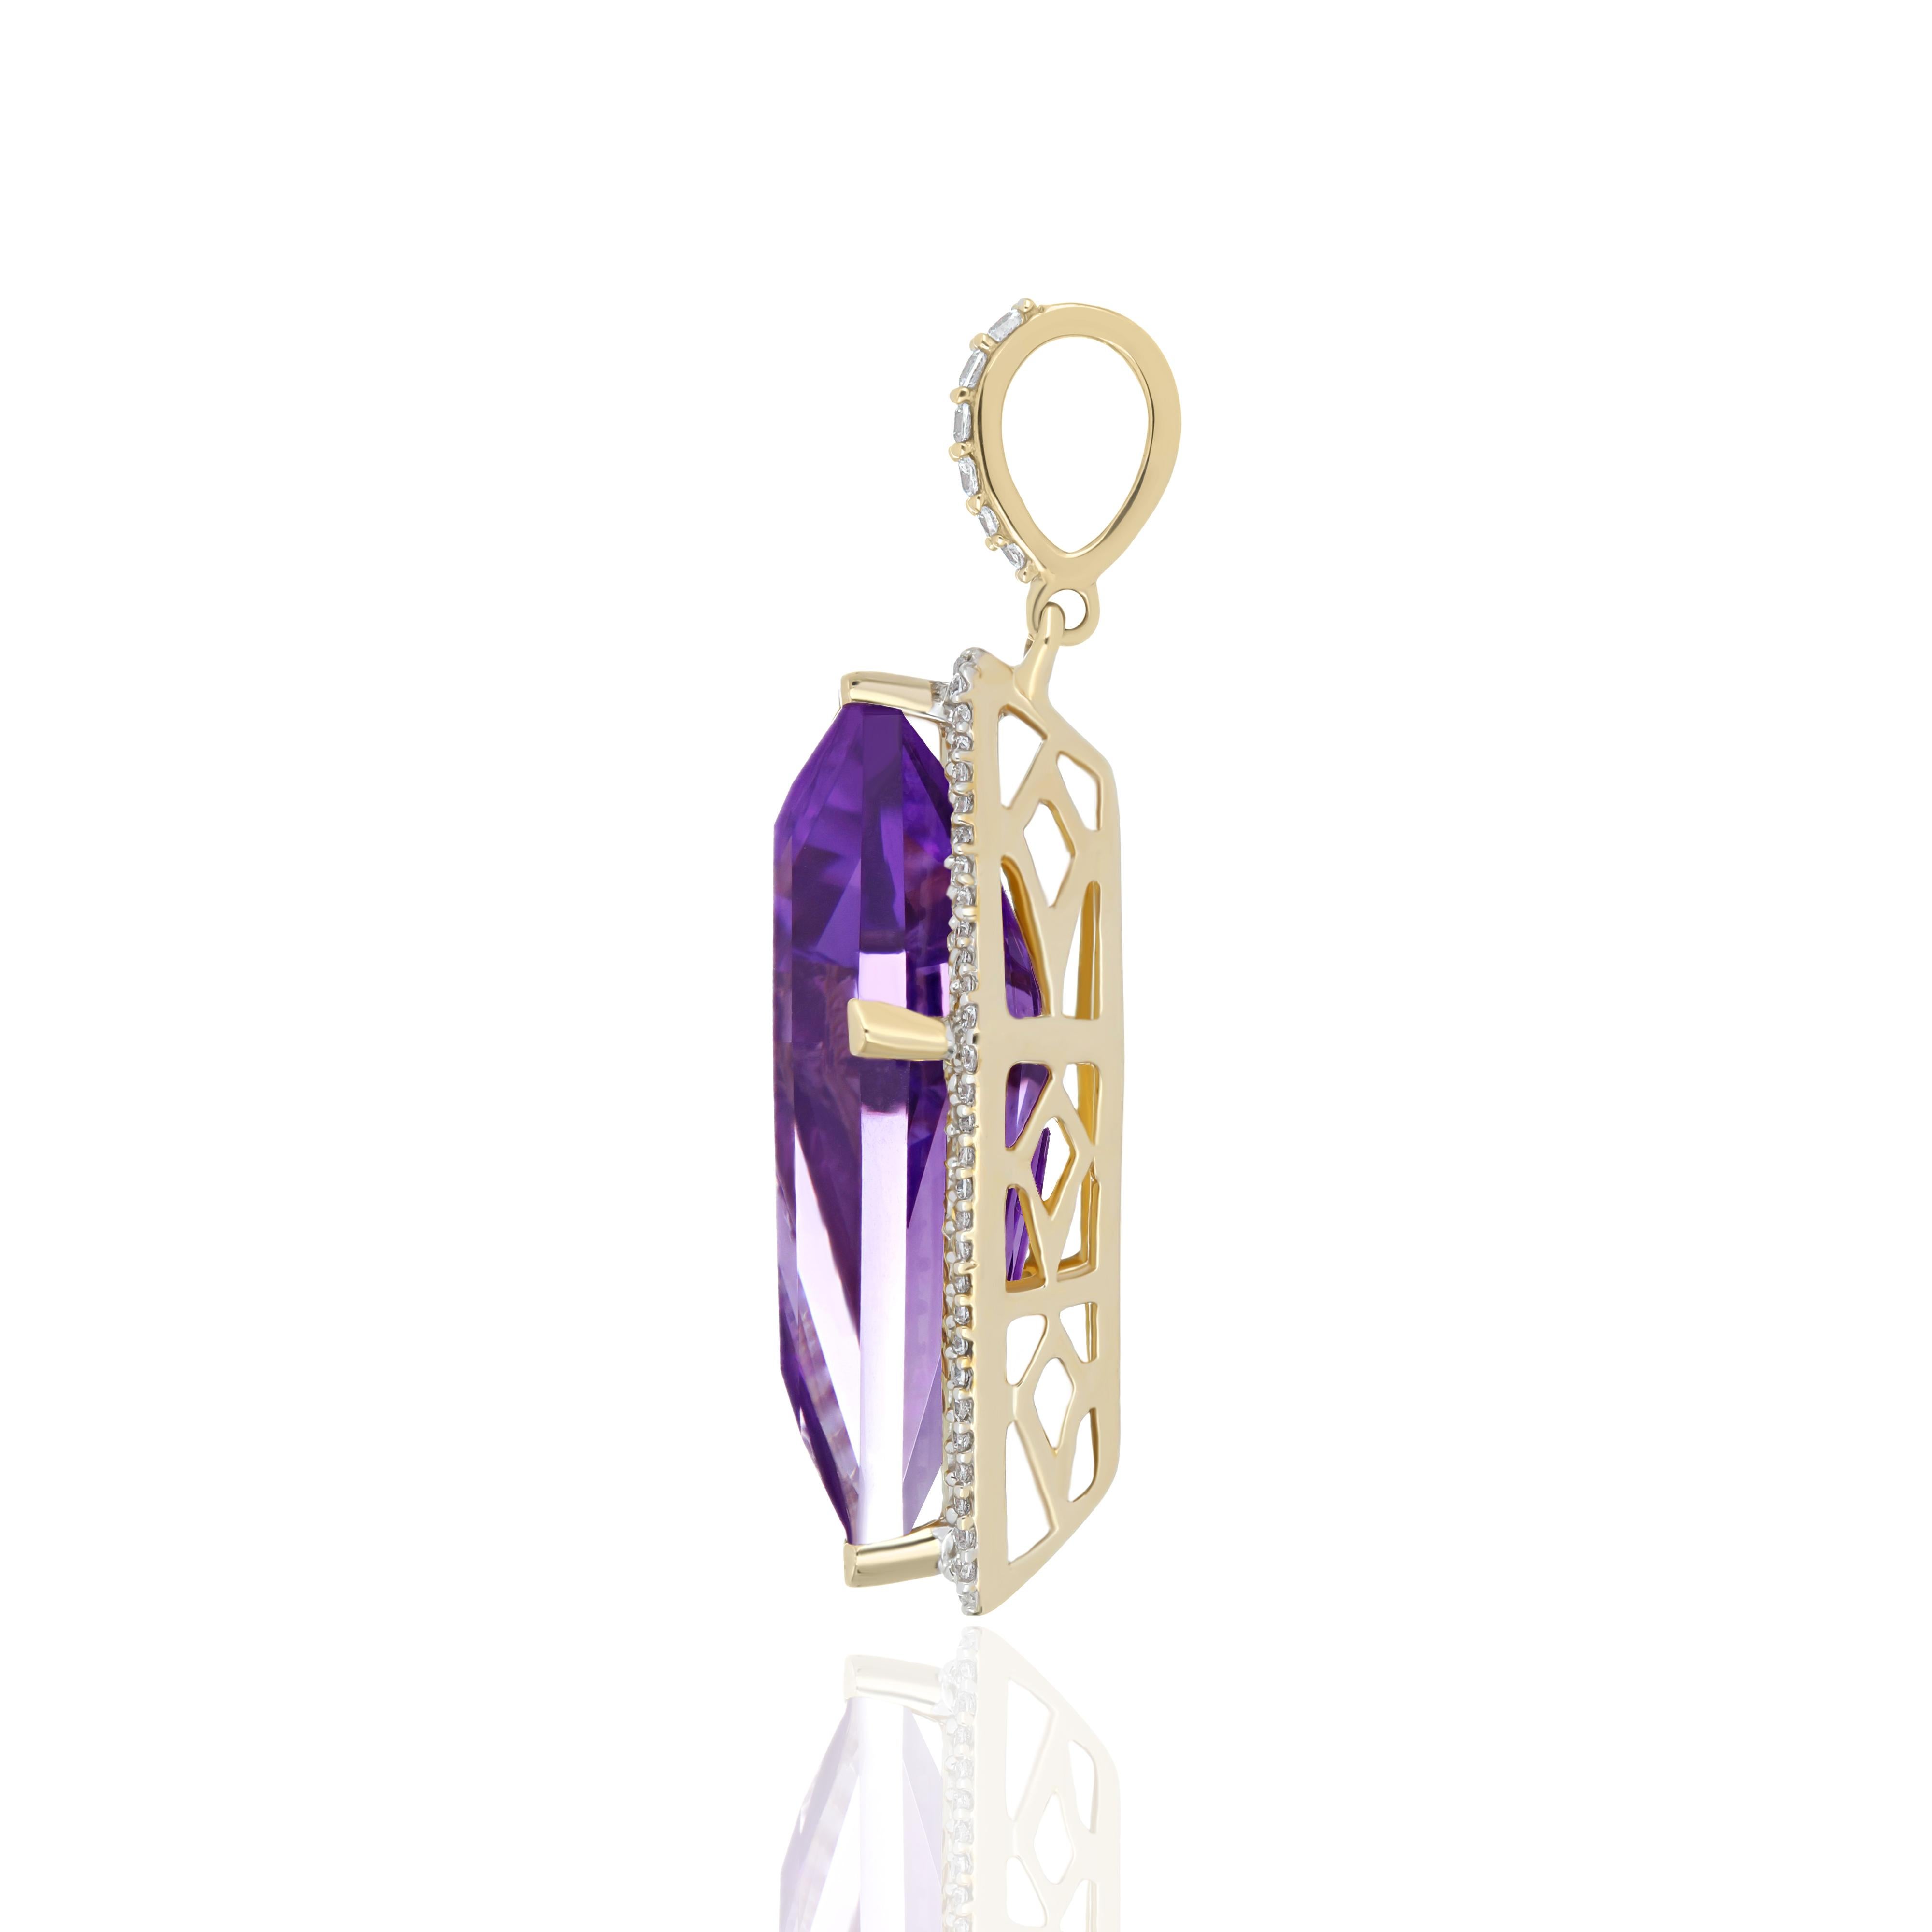 Elegant and Exquisitely Detailed 14Karat Yellow Gold Pendant studded with Amethyst in Kite Shape weighing approx. 7.03Cts and White Sapphire in Round Shape with weighing approx. 0.32Cts. Beautifully Hand-Crafted Pendant in 14 Karat Yellow Gold